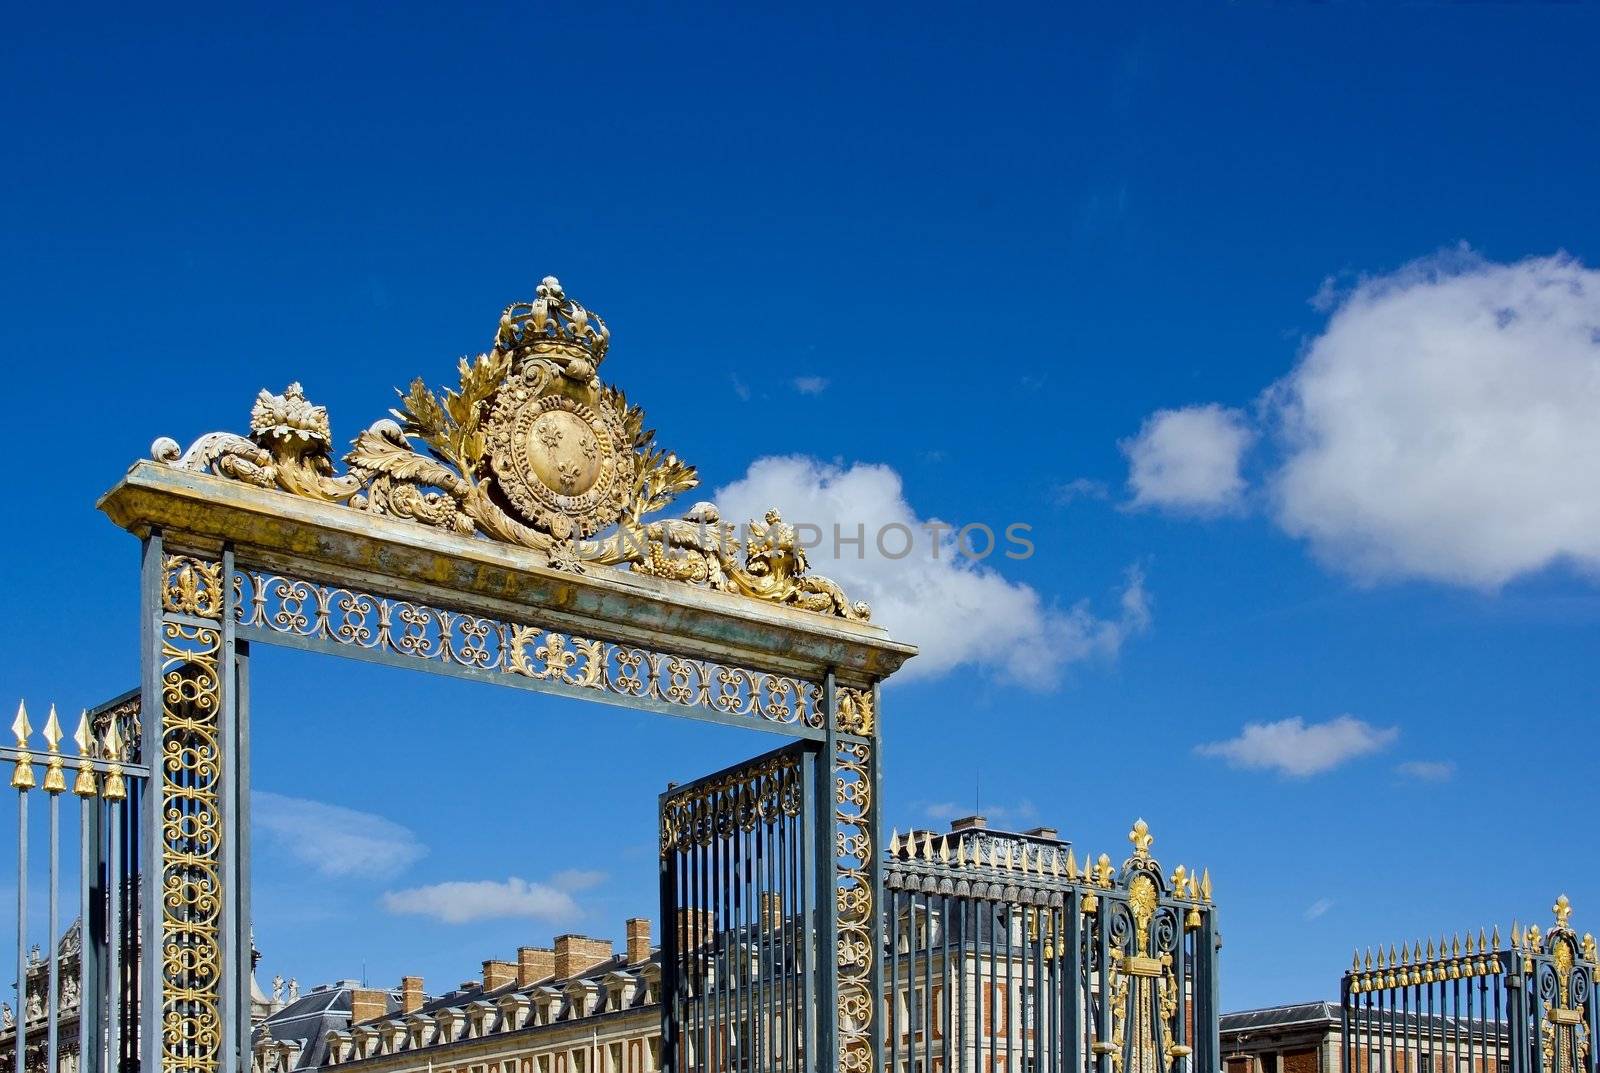 entrance to the castle of Versailles (France) by neko92vl